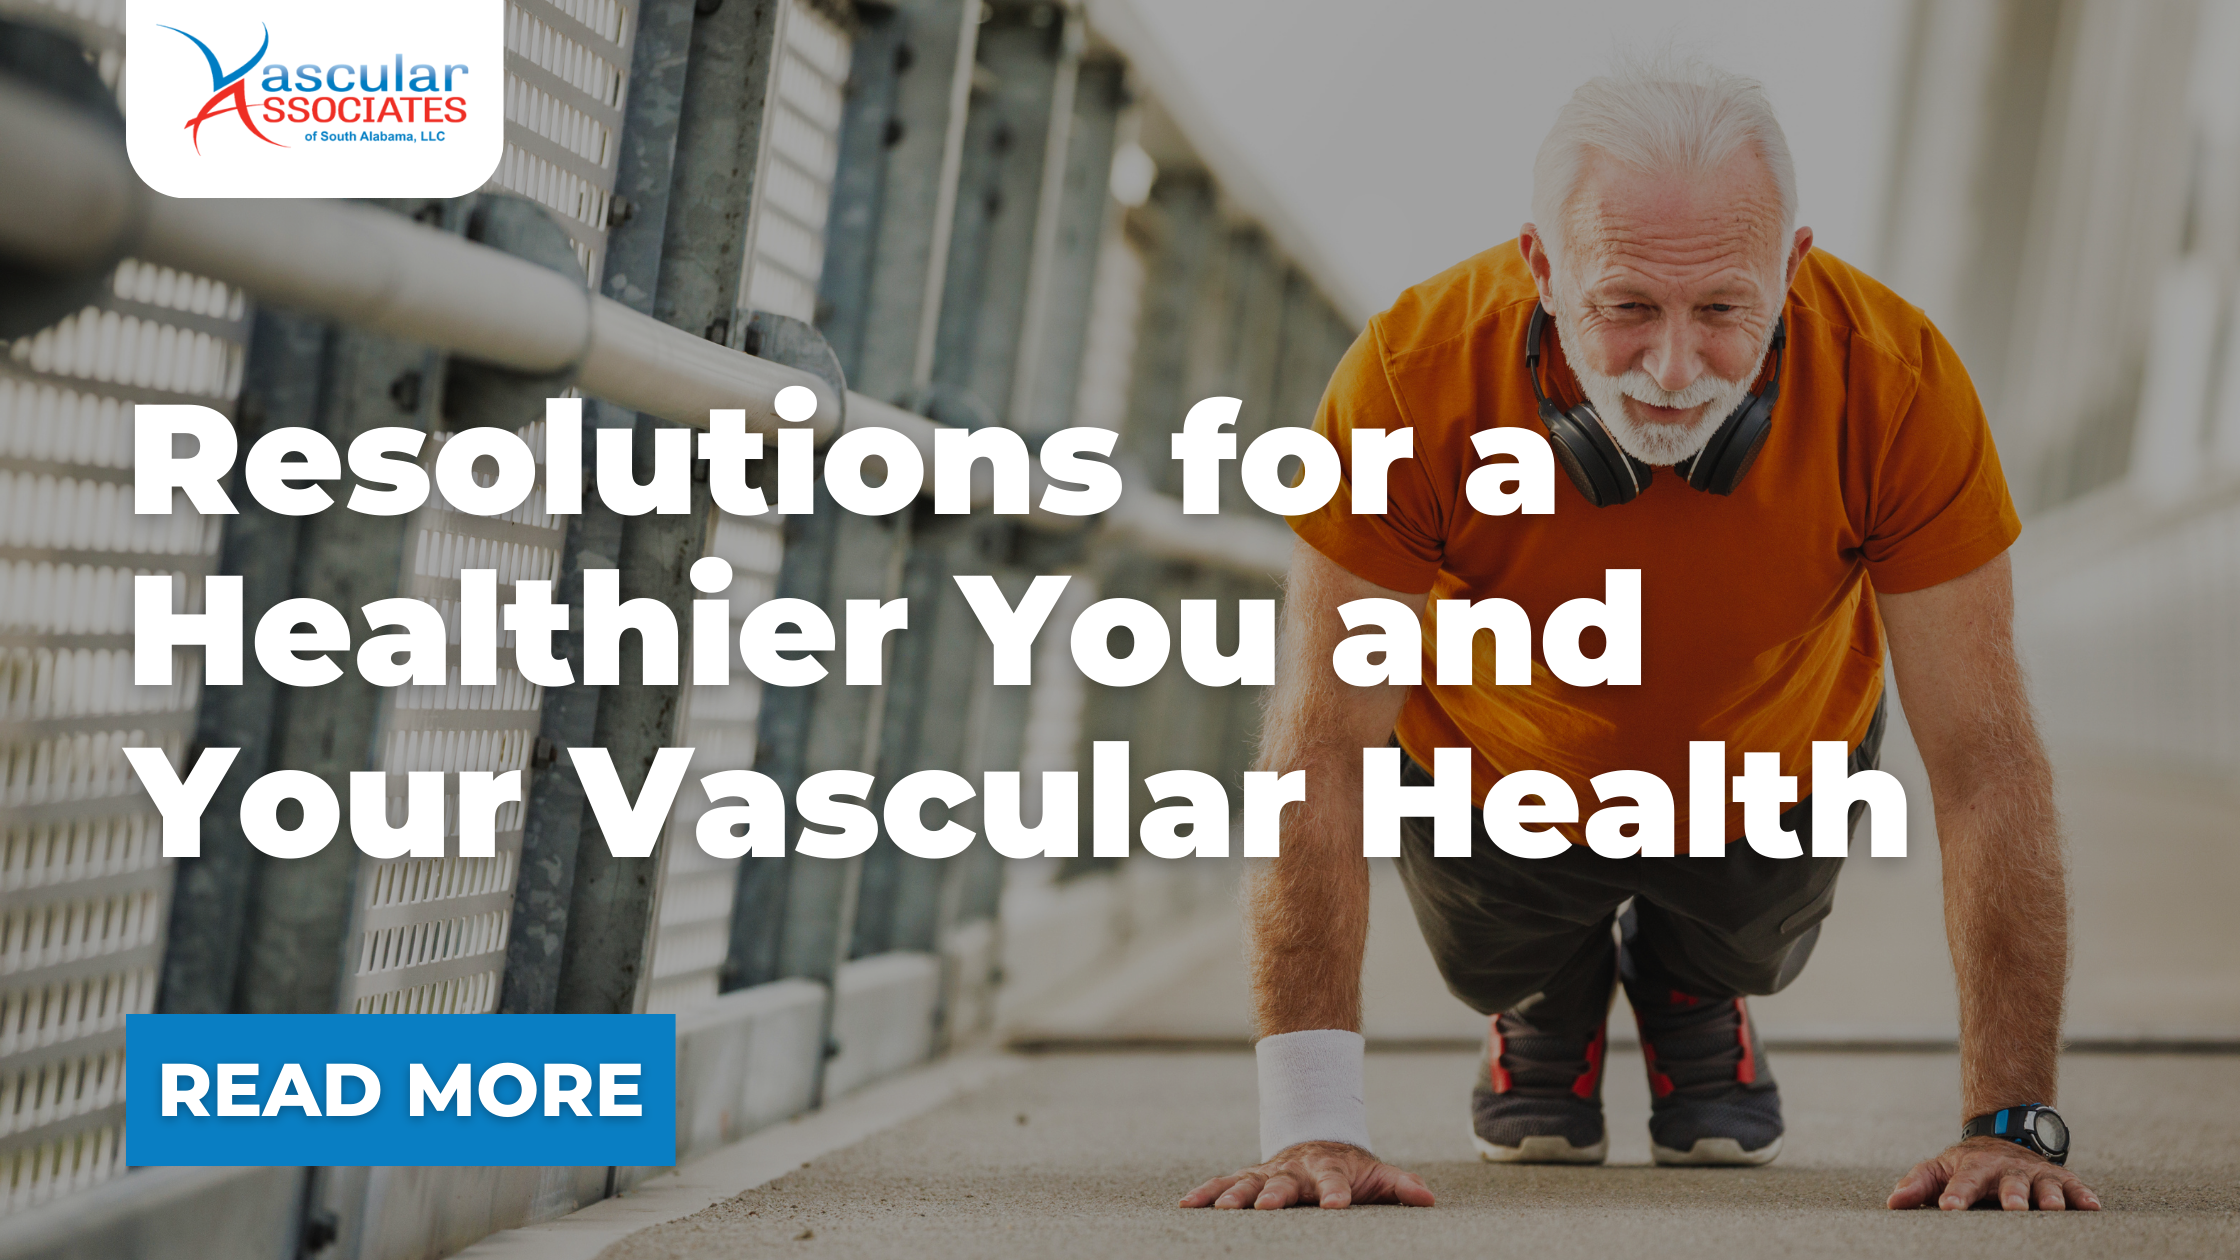 Vascular Blog - Resolutions for a Healthier You and Your Vascular Health.png